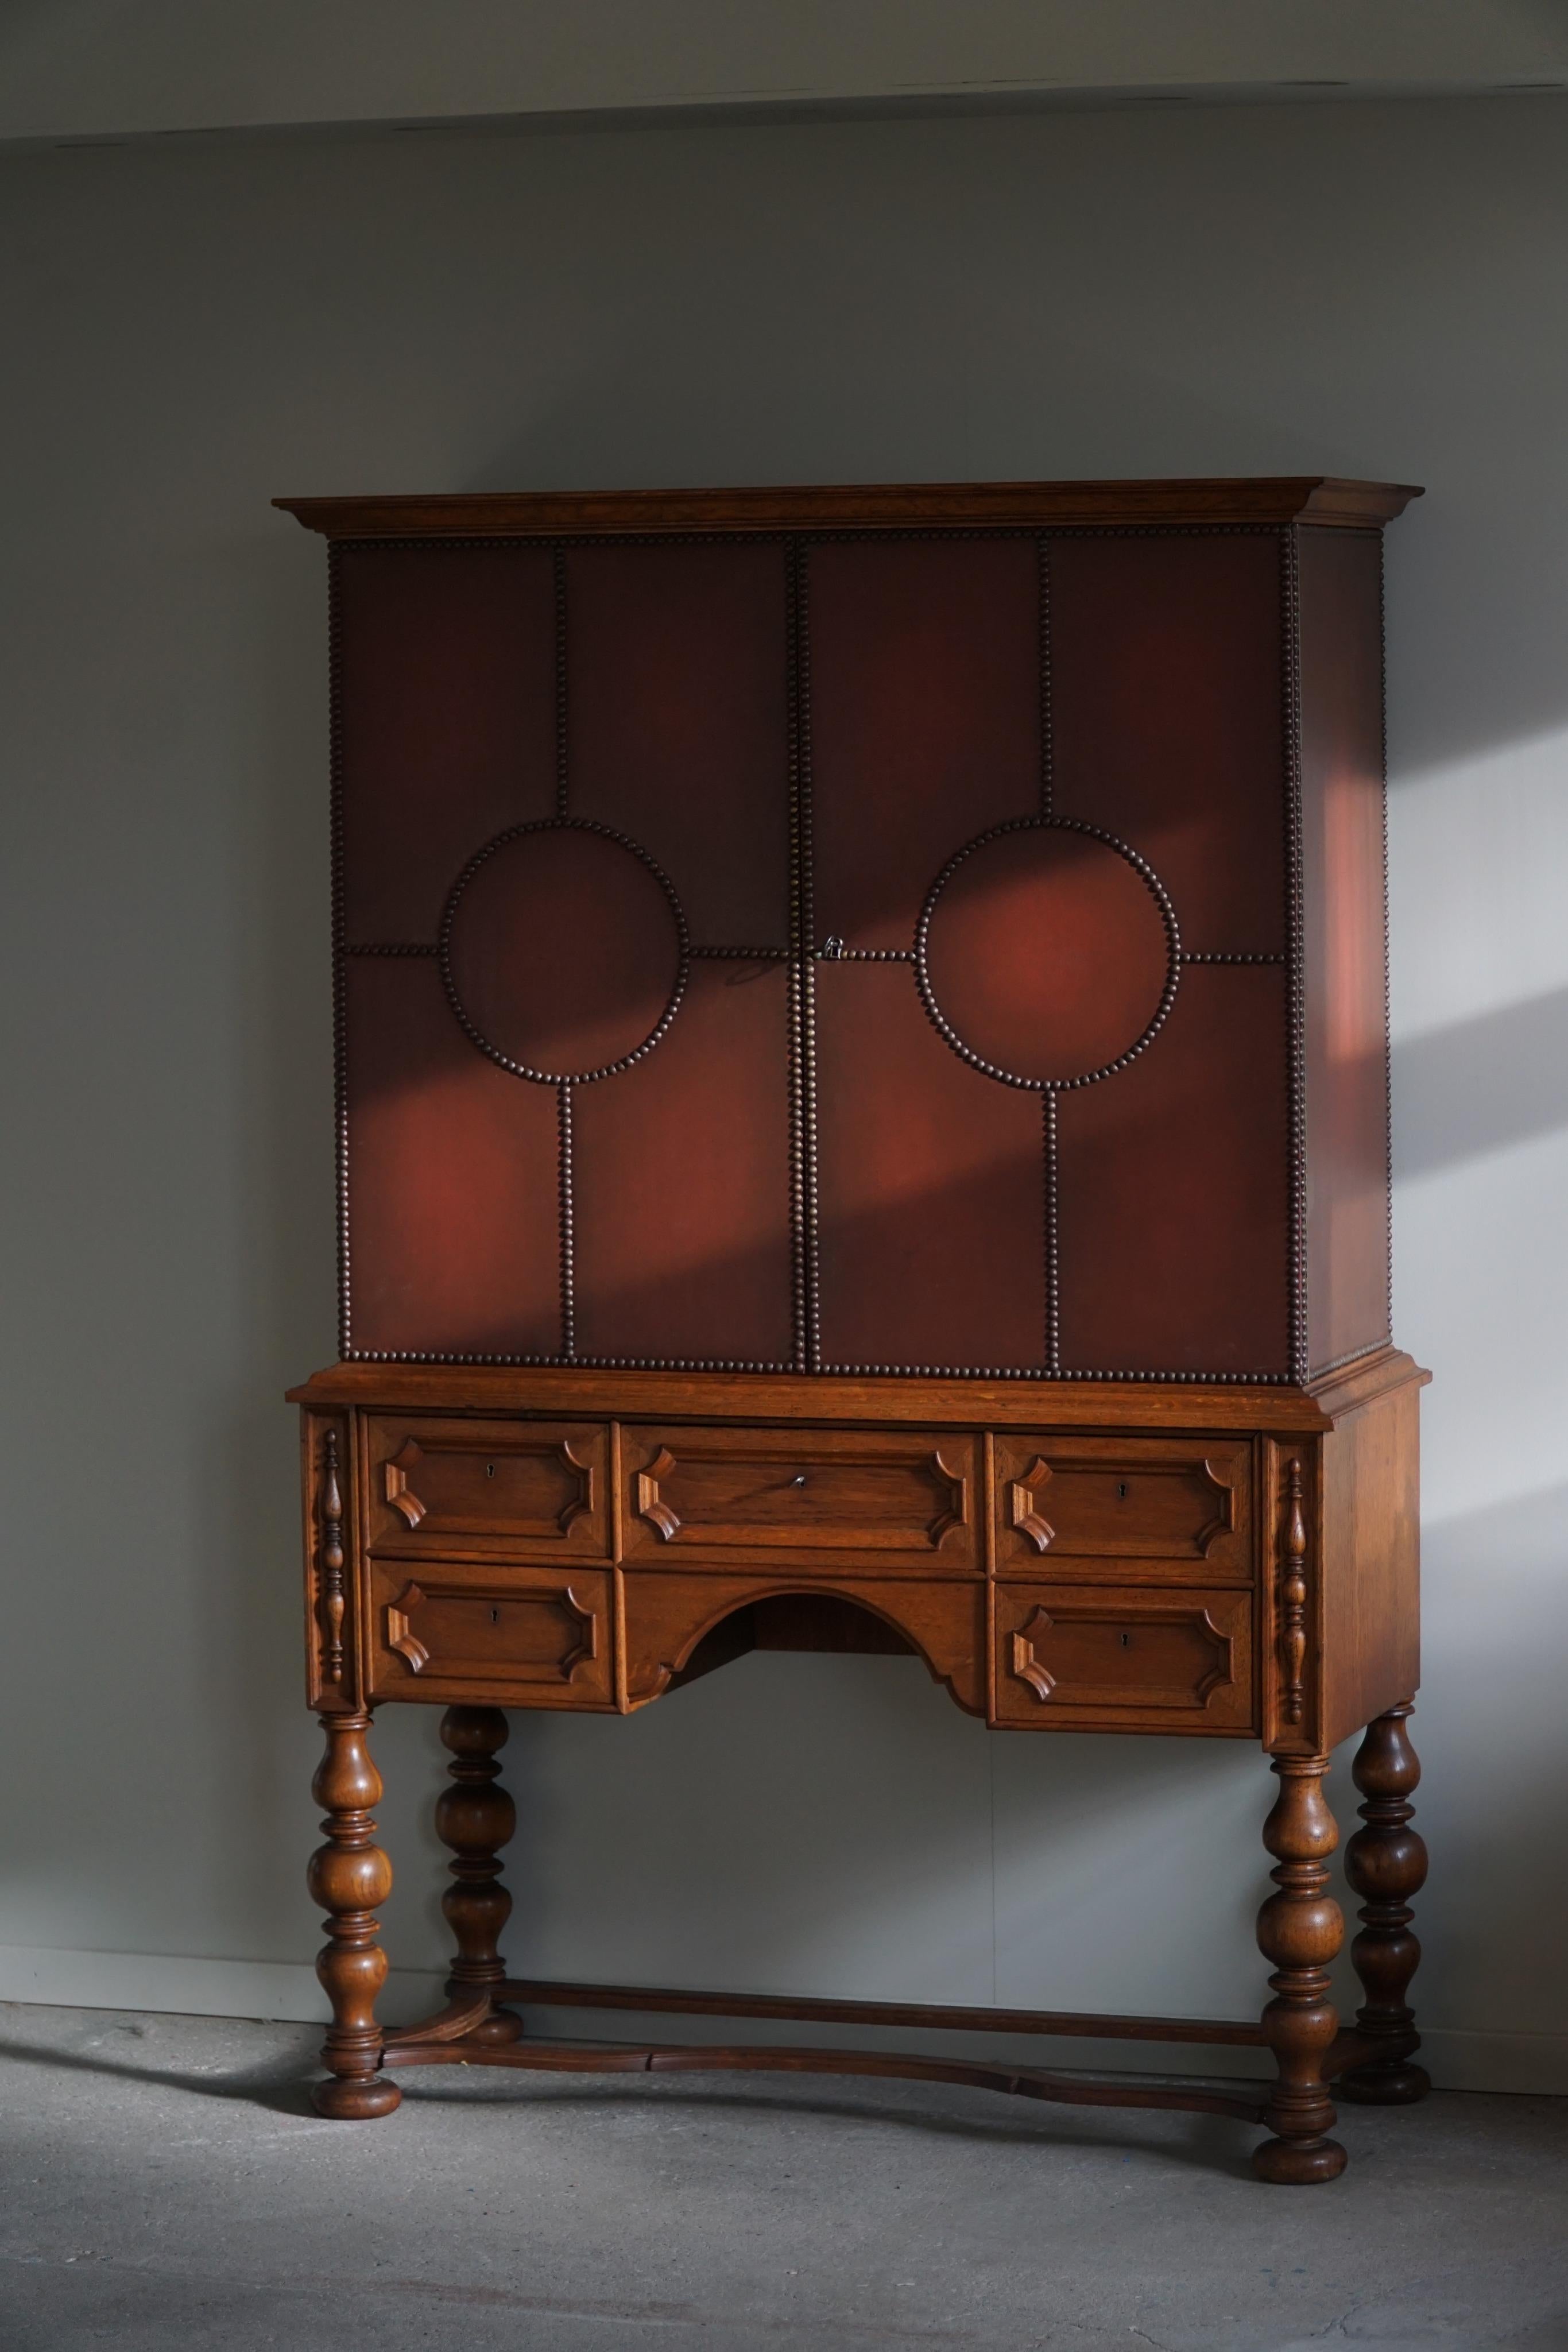 Baroque Otto Schulz, Swedish Modern Cabinet in Leather, Oak & Brass Nails, 1930s For Sale